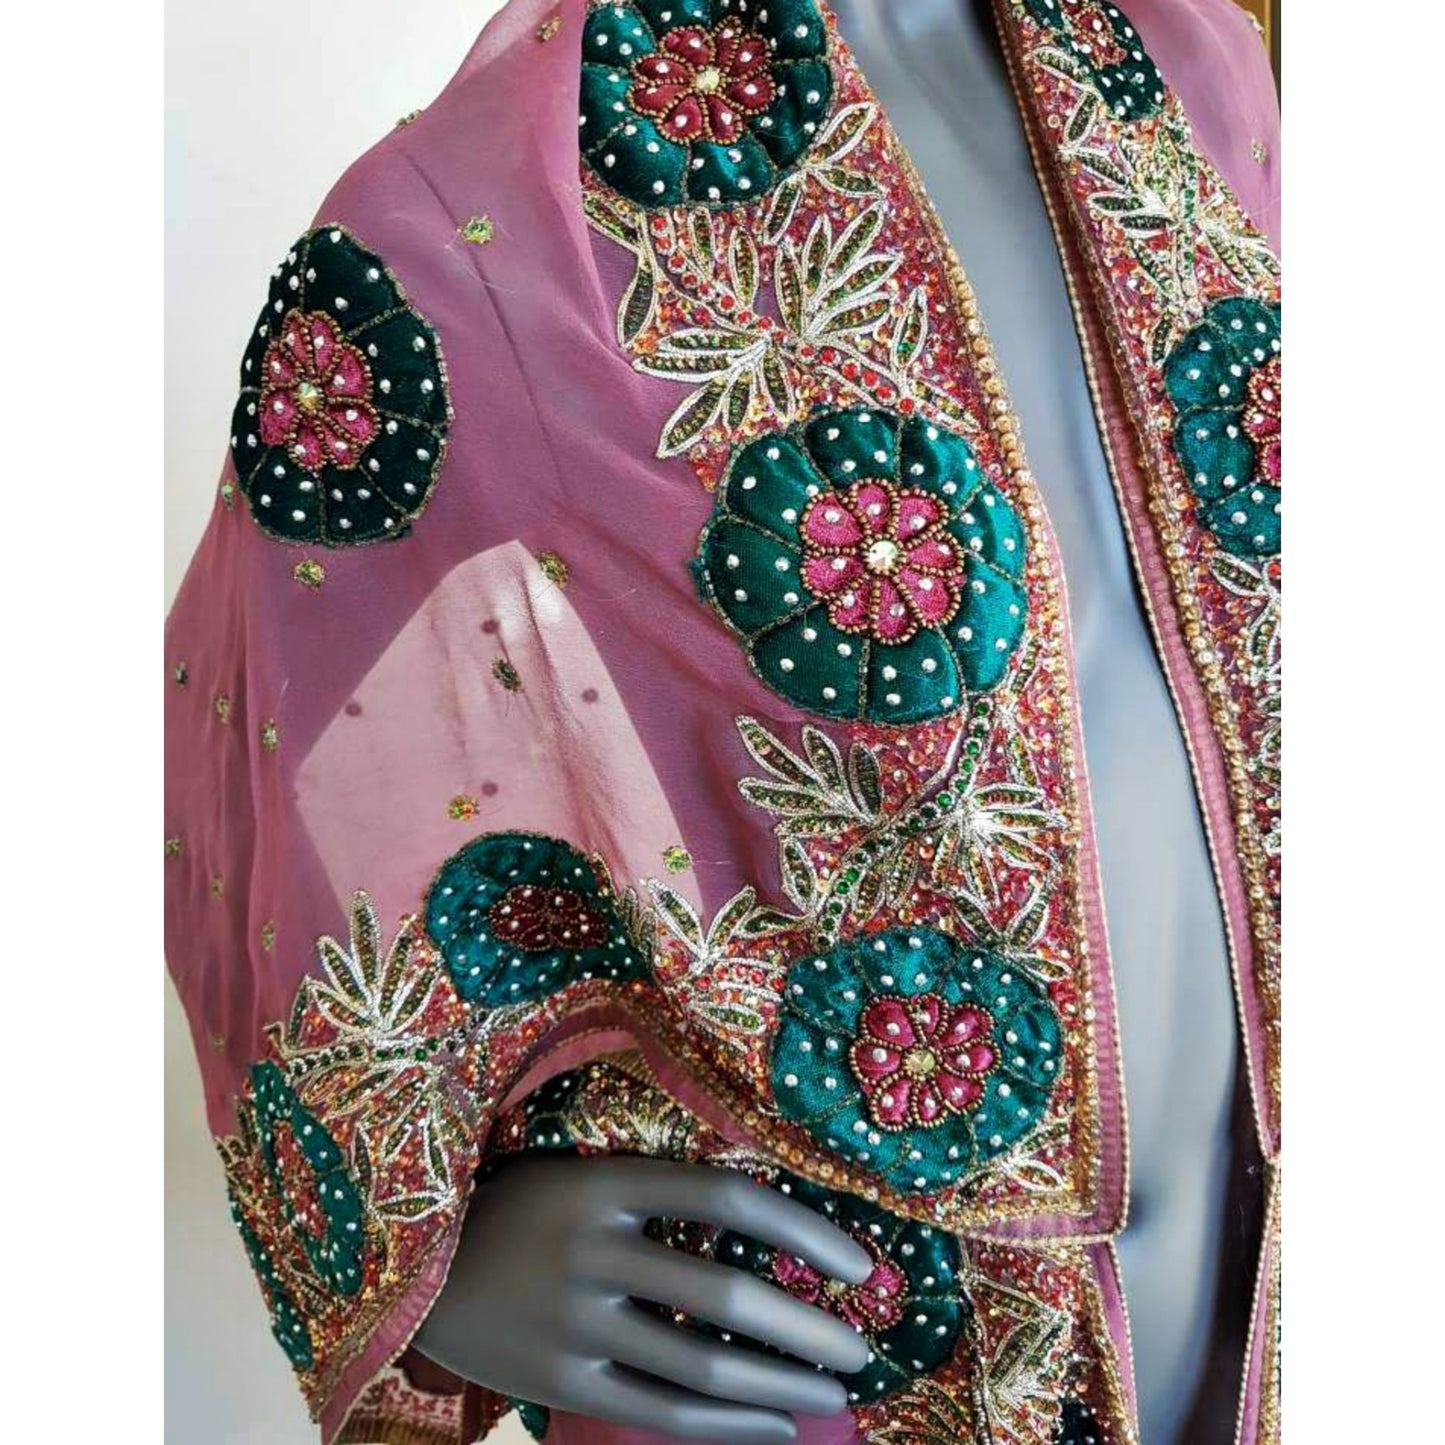 Luxurious semi sheer dusty pink draped kimono, beautifully hand embroidered with velvet appliques (XL)